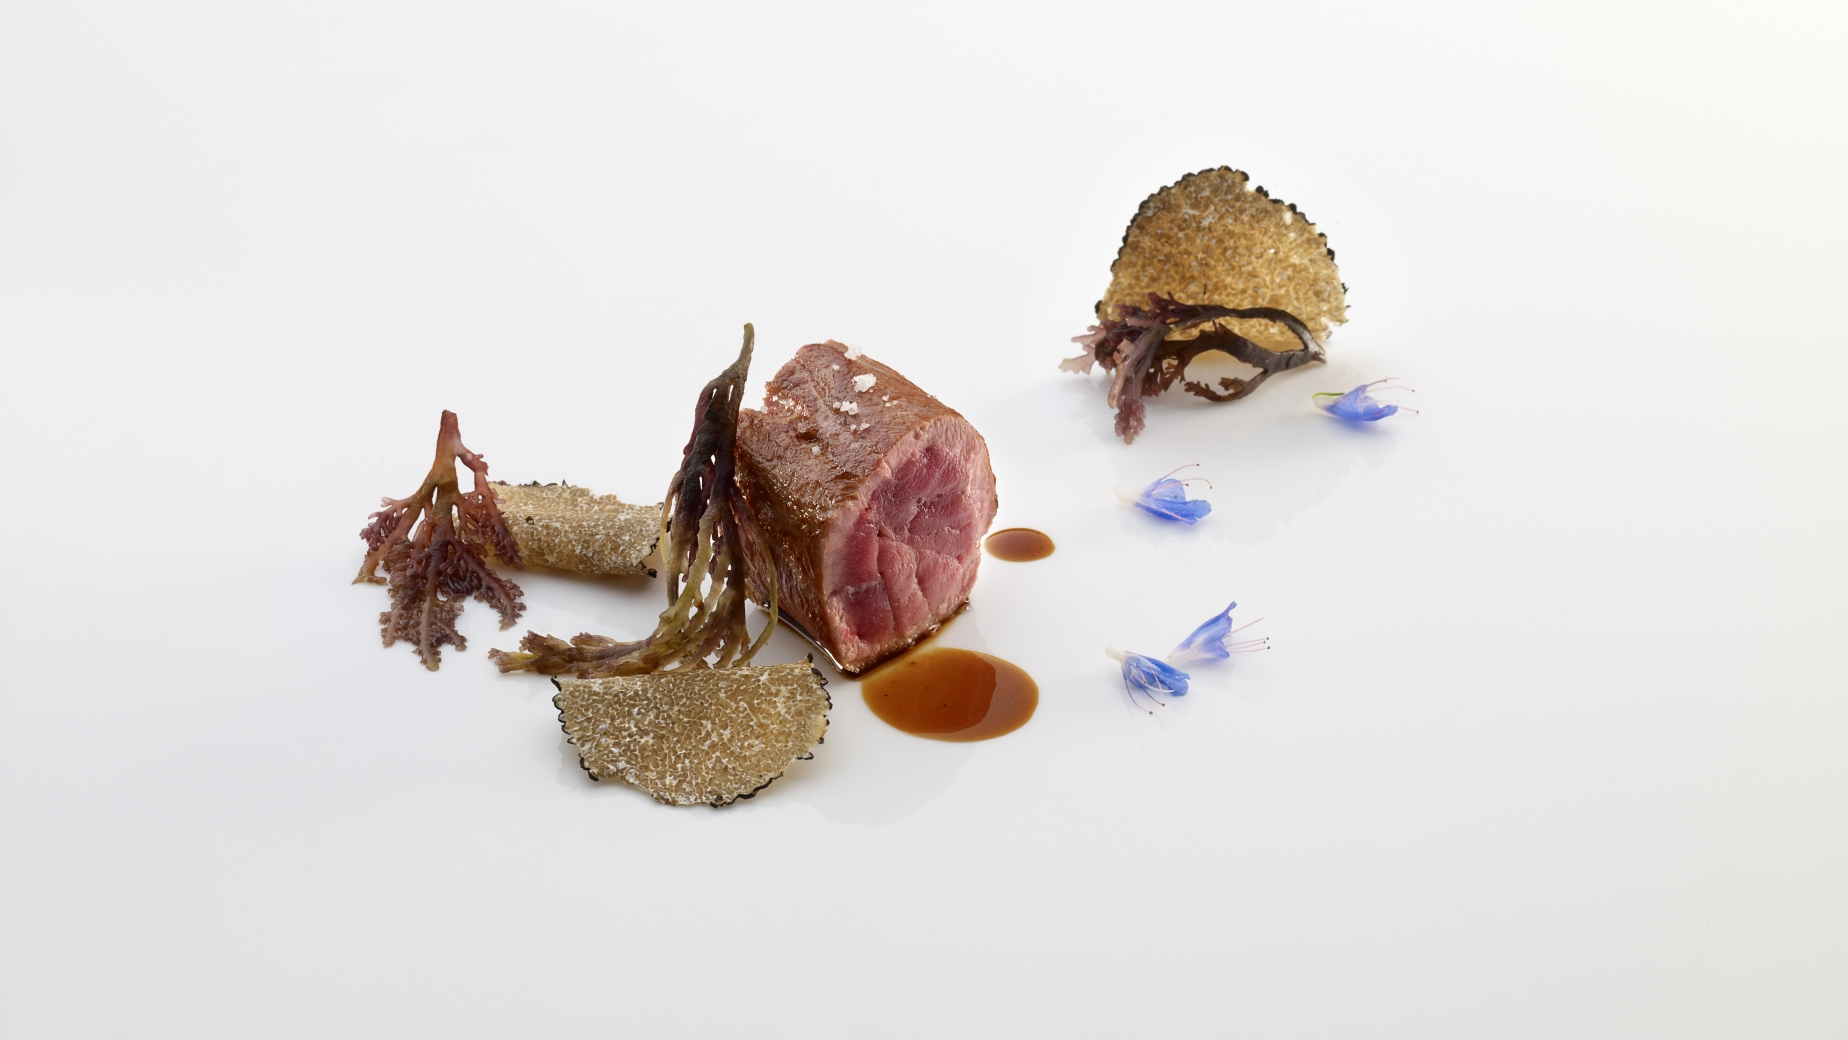 Loin of duck. served with iodized compliments; crumblings and shavings of summer truffle.

PHOTO: José Luis López de Zubiría / Mugaritz